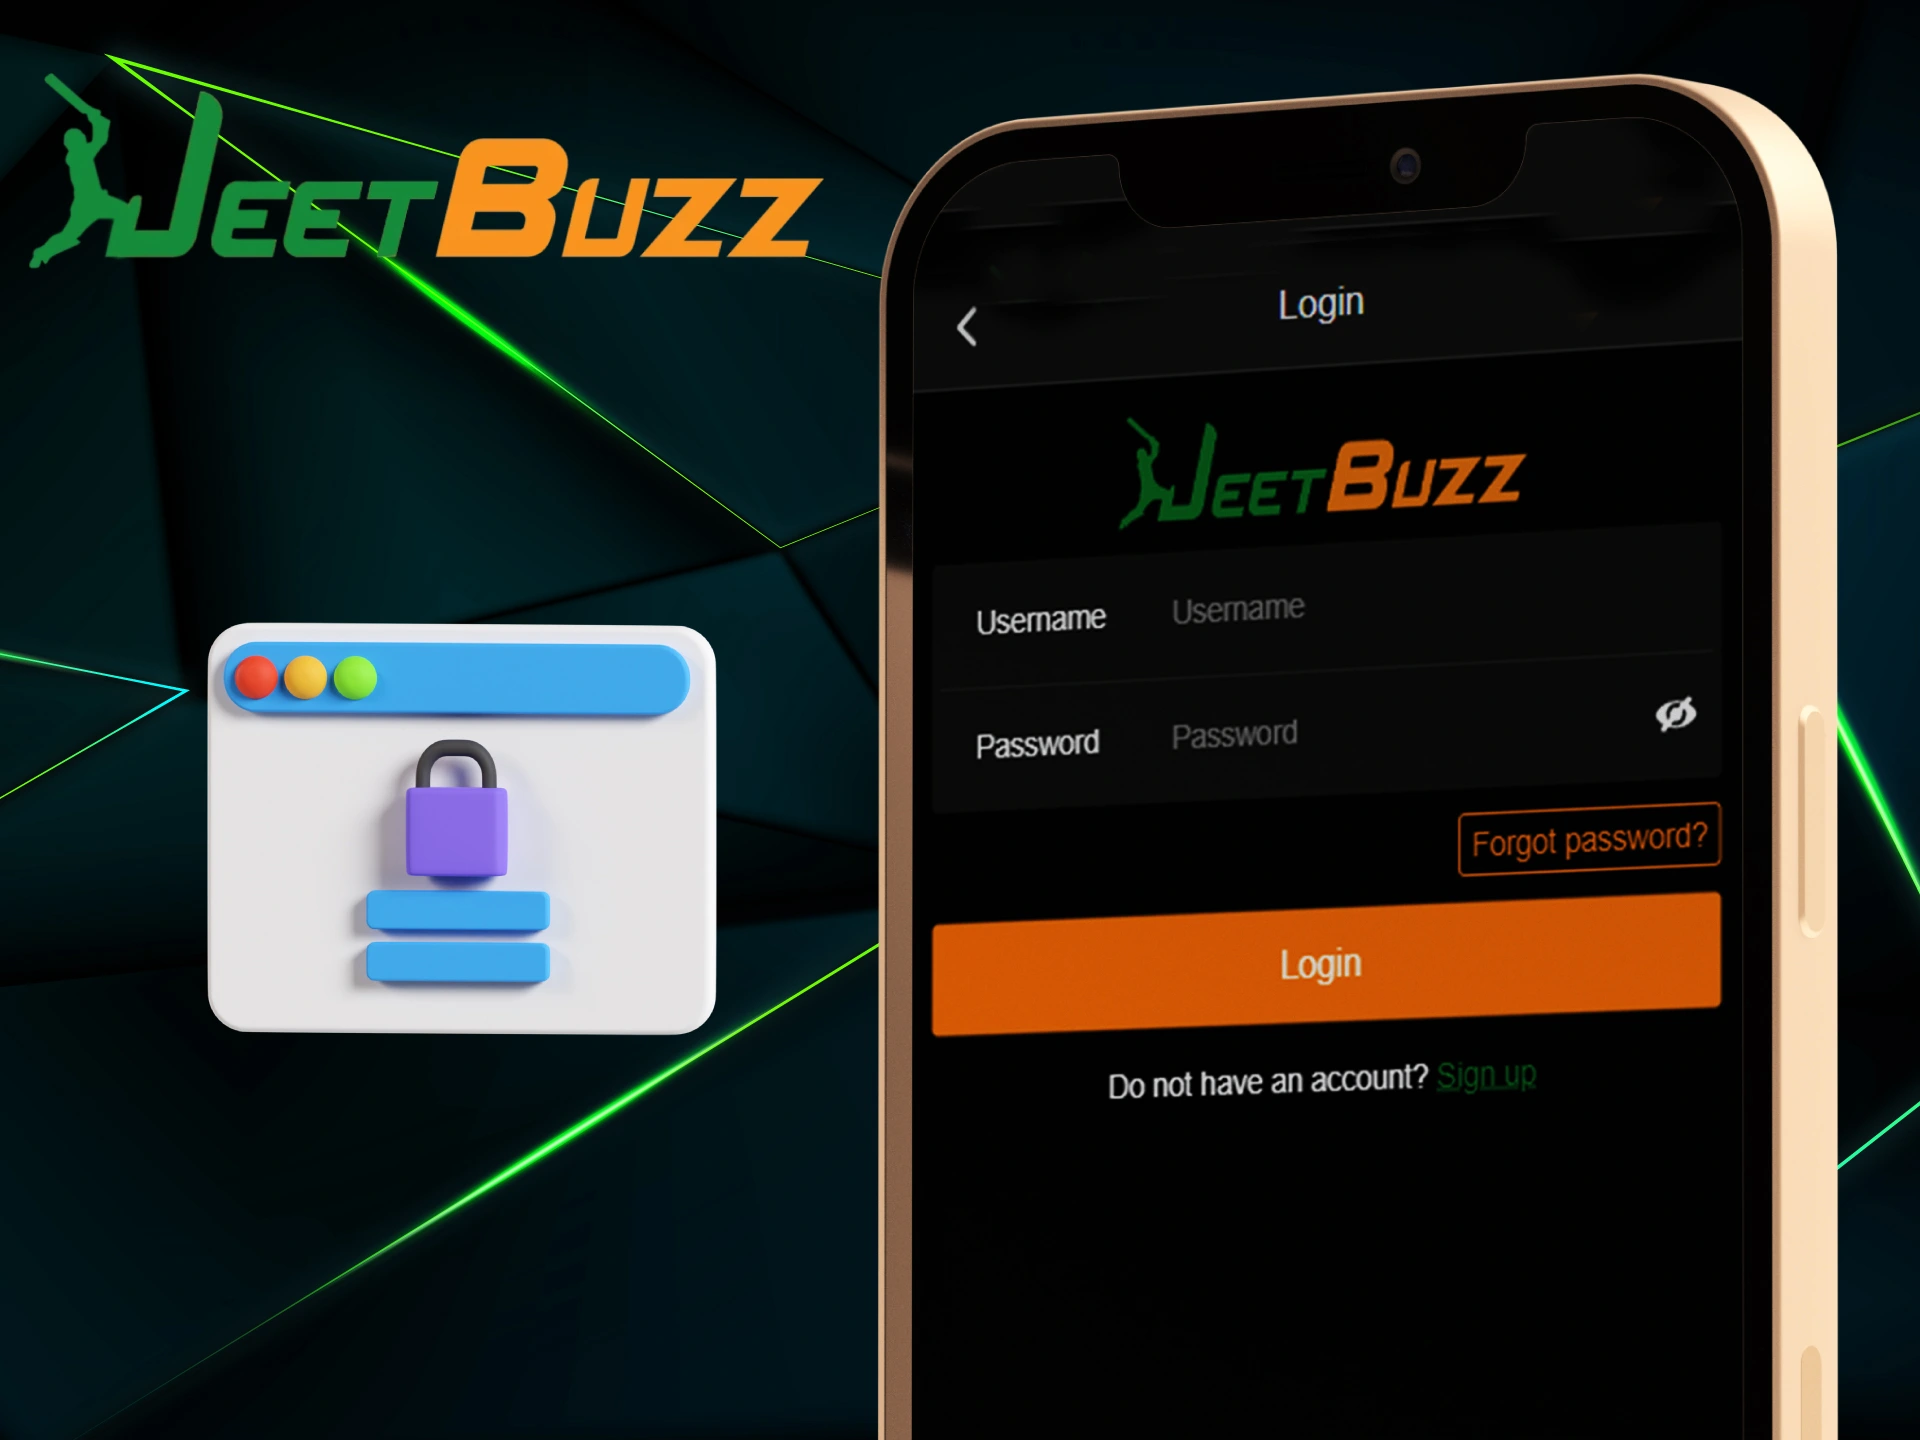 Enter your username and password in the JeetBuzz app.